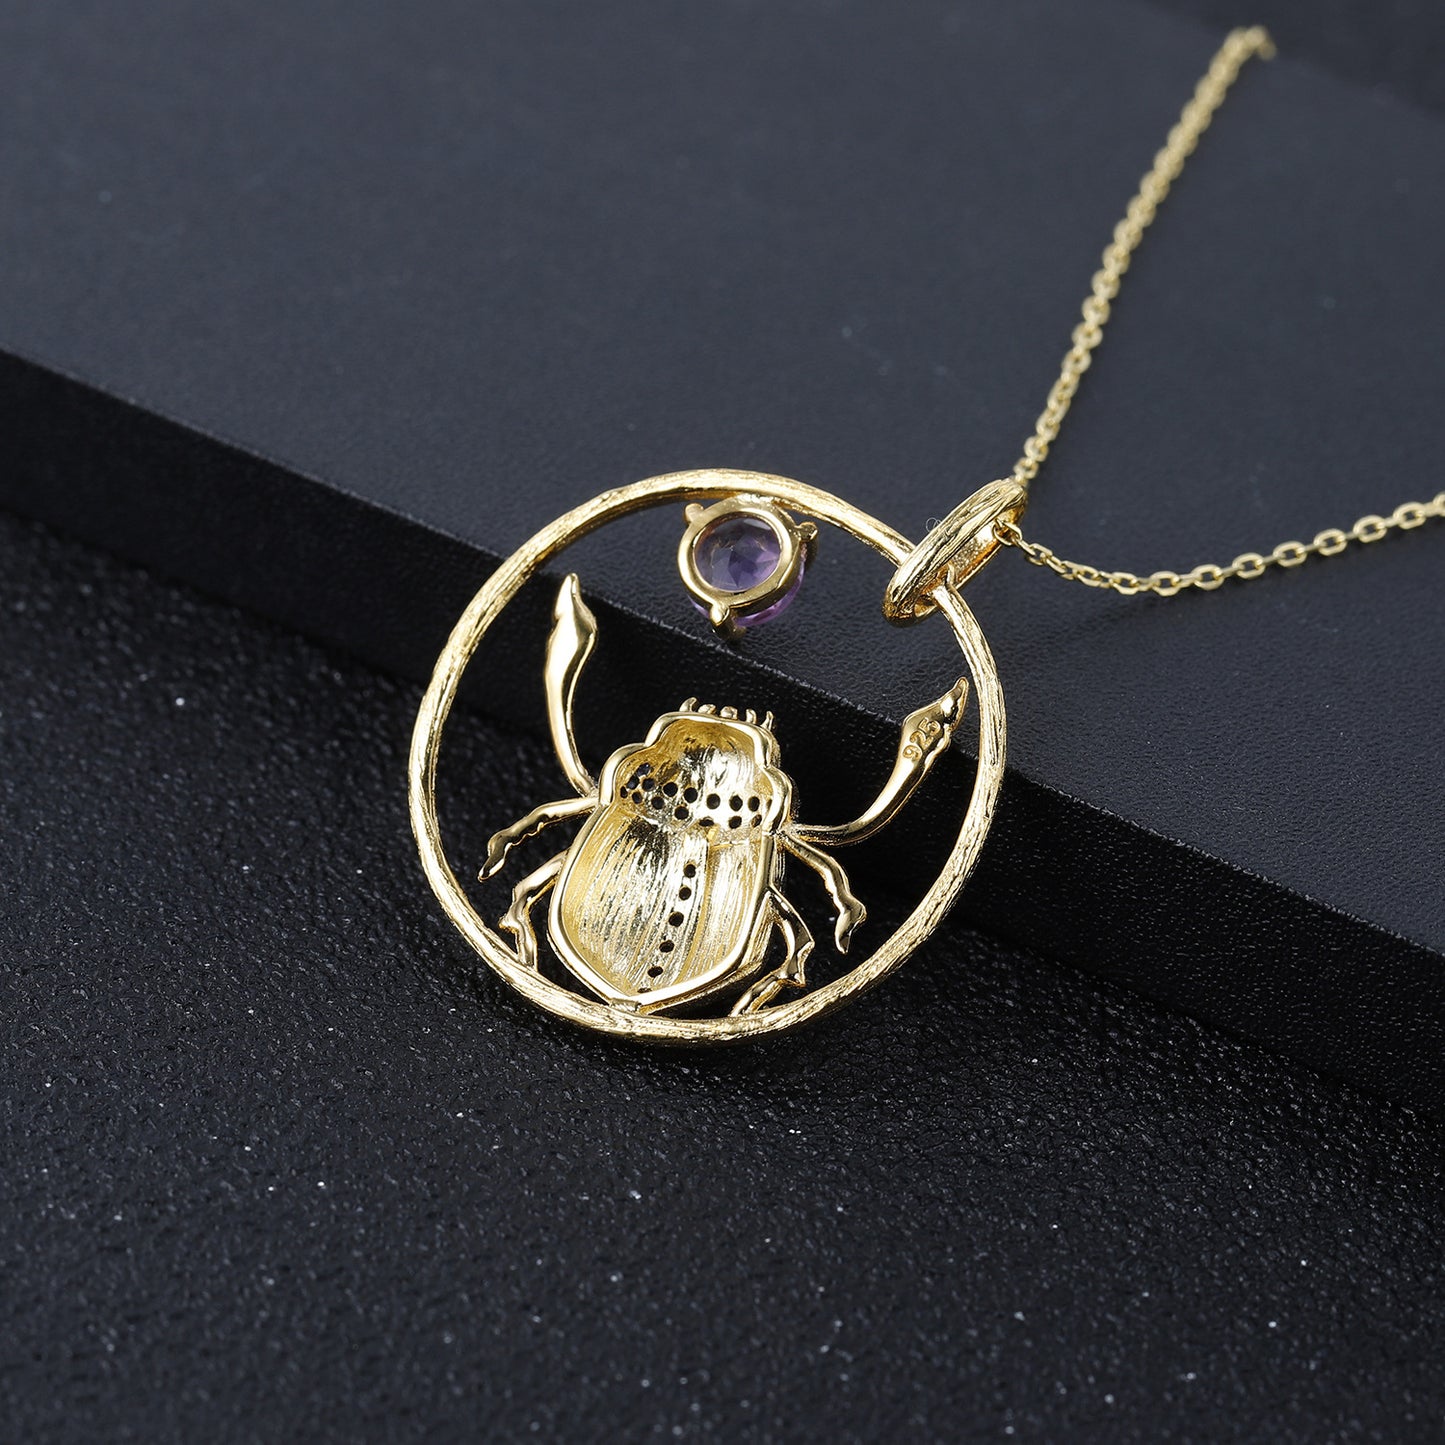 Designer Premium Insect Element Personality Design Natural Amethyst Silver Necklace for Women